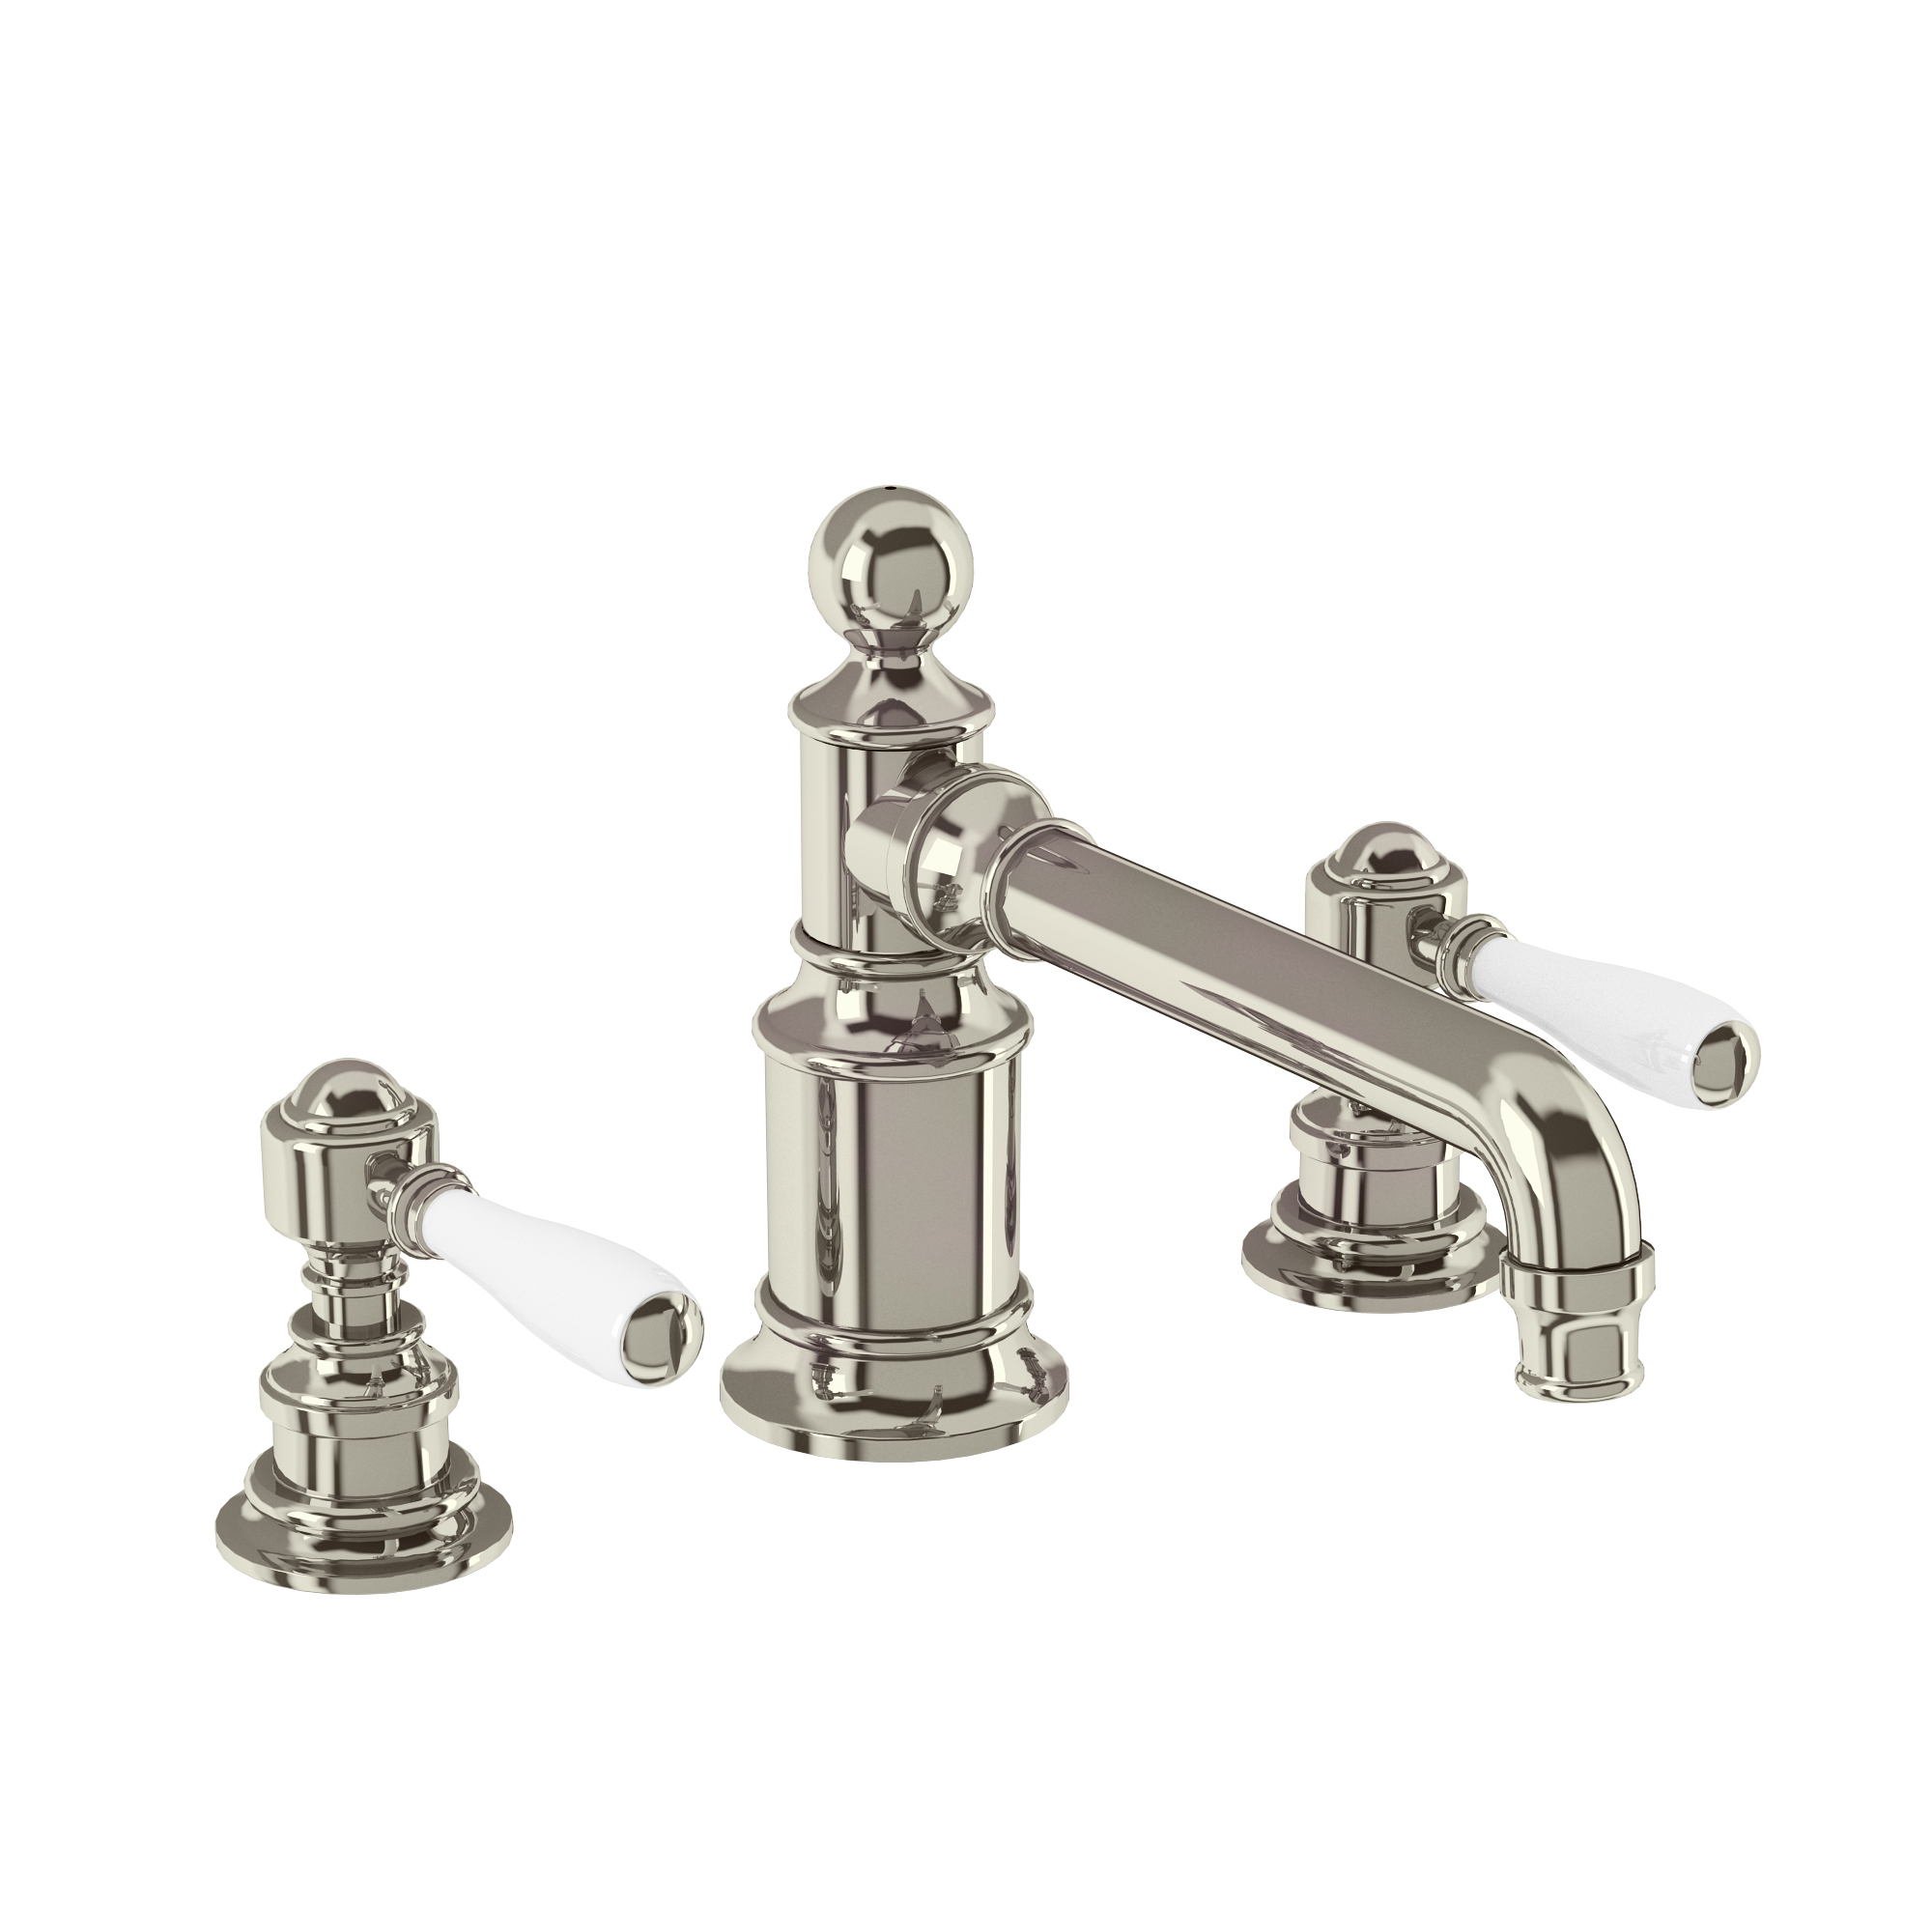 Arcade Three hole basin mixer deck-mounted without pop up waste- nickel - with ceramic lever